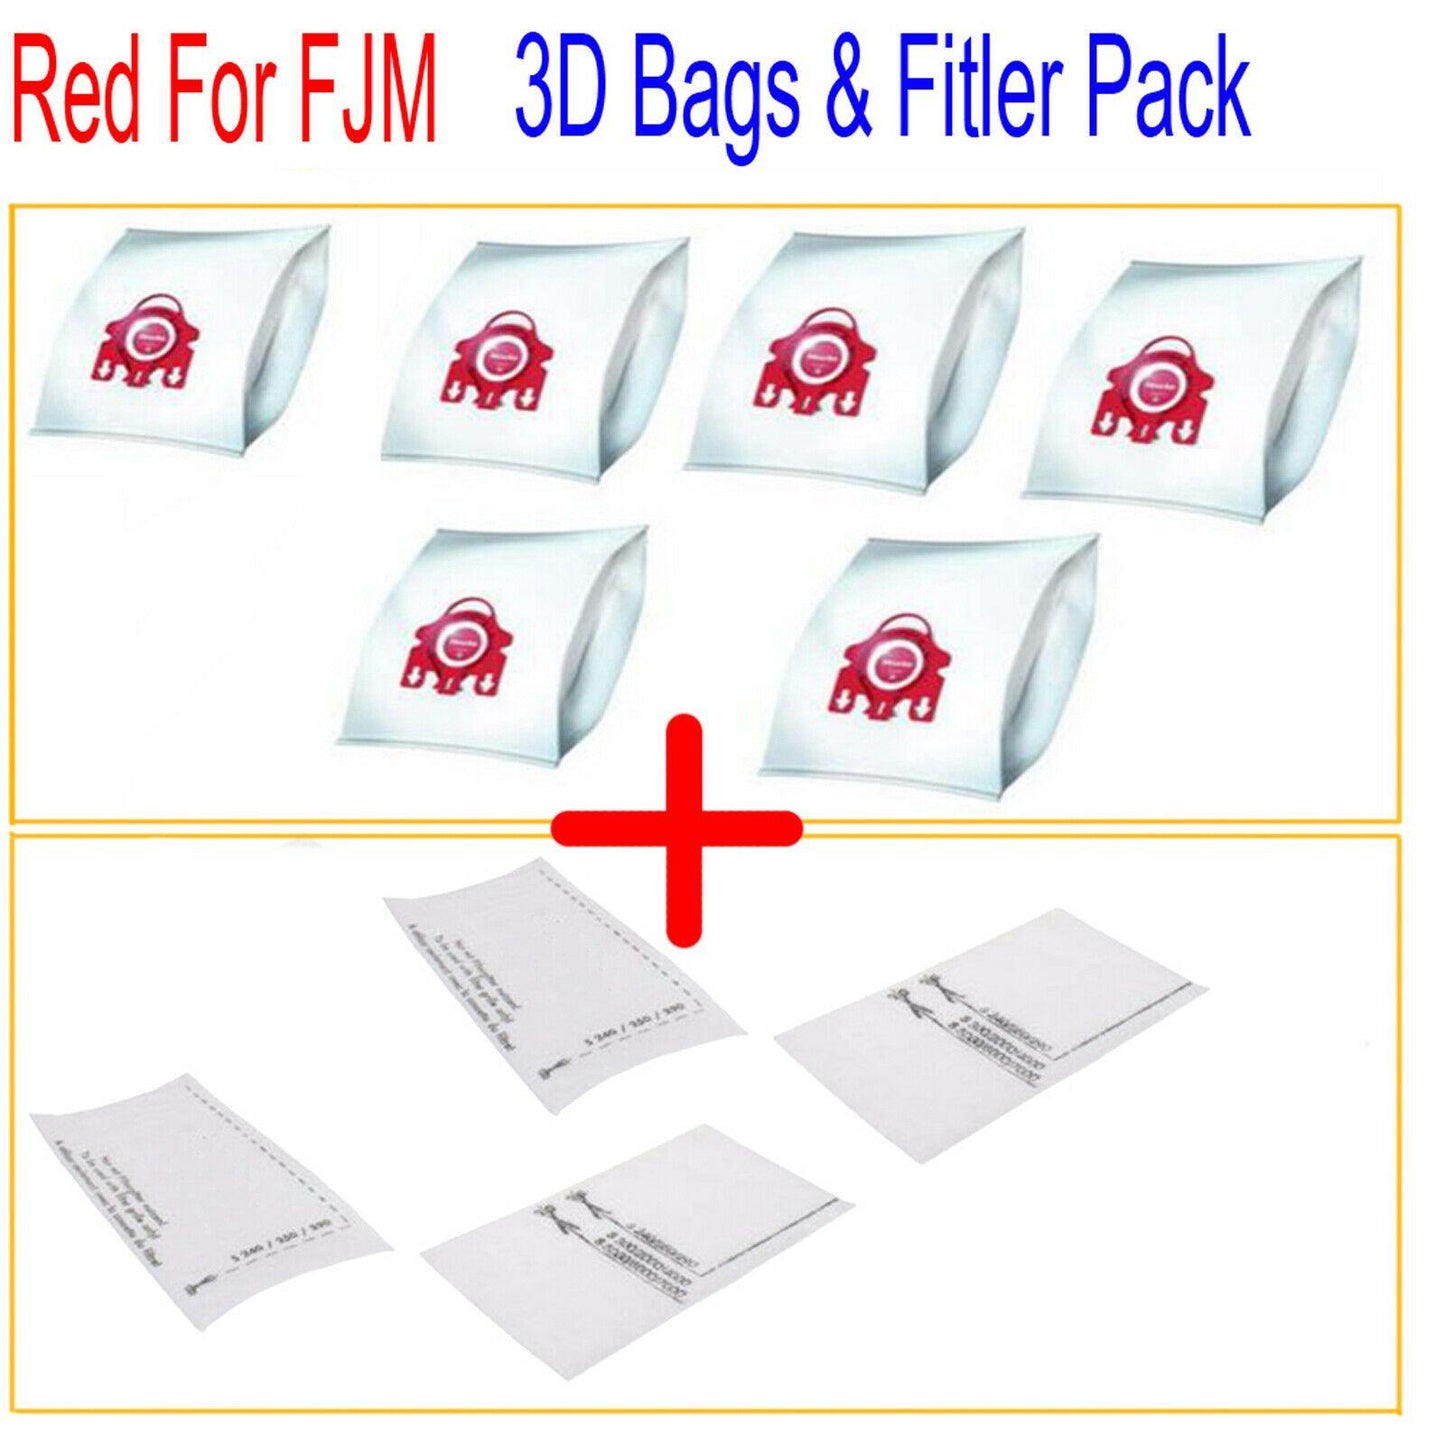 6X Synthetic Dust Bags For Miele FJM HYCLEAN Compact C1 C2 S4 S6 S291 S381 S571 Sparesbarn